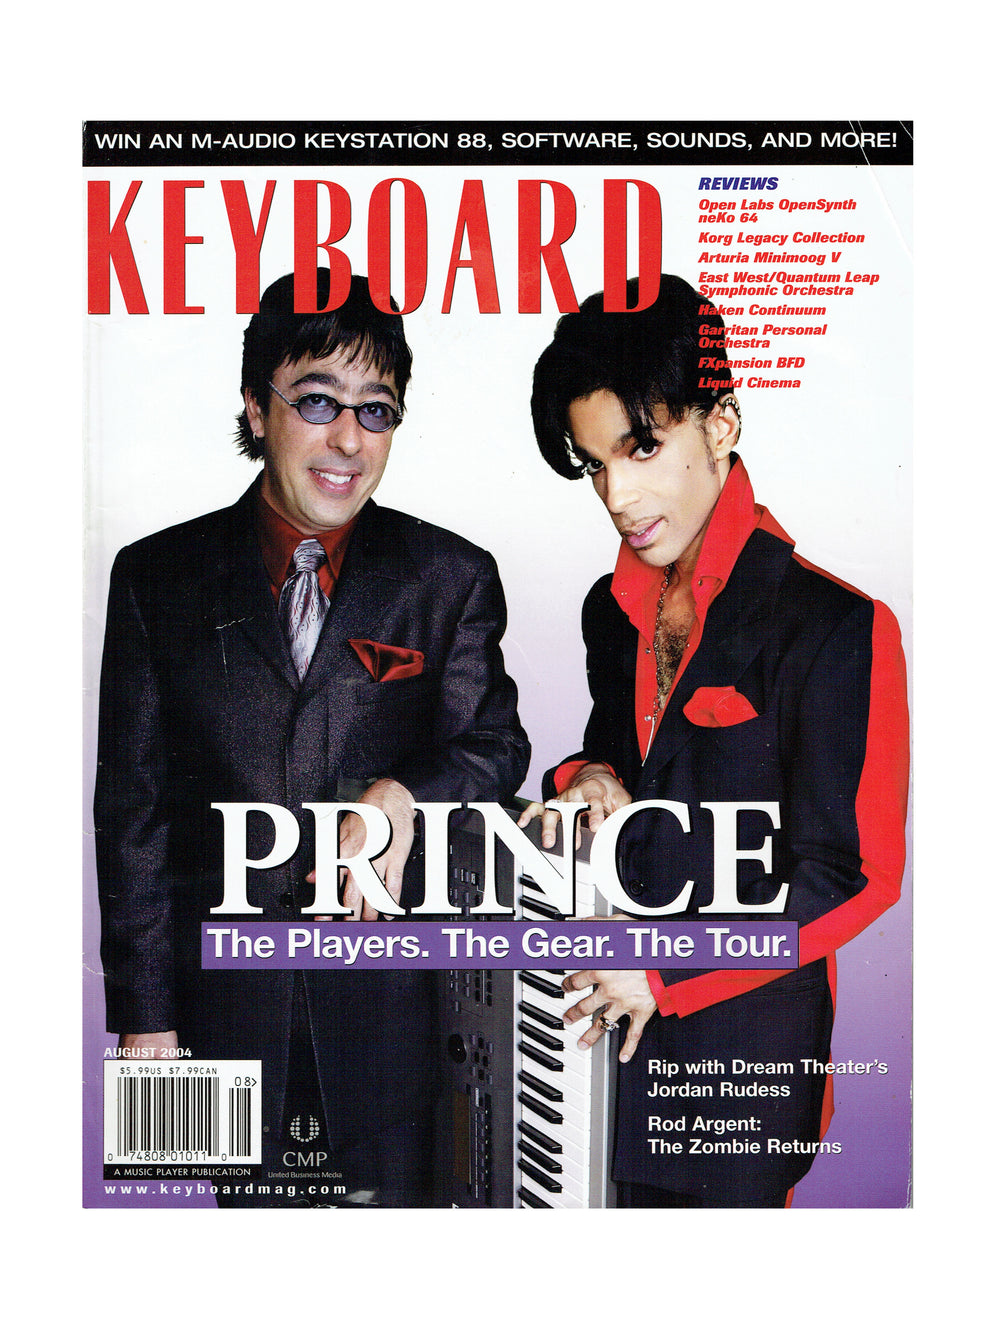 Prince Keyboard Magazine August 2004 Renato Neto Cover 5 Page Article